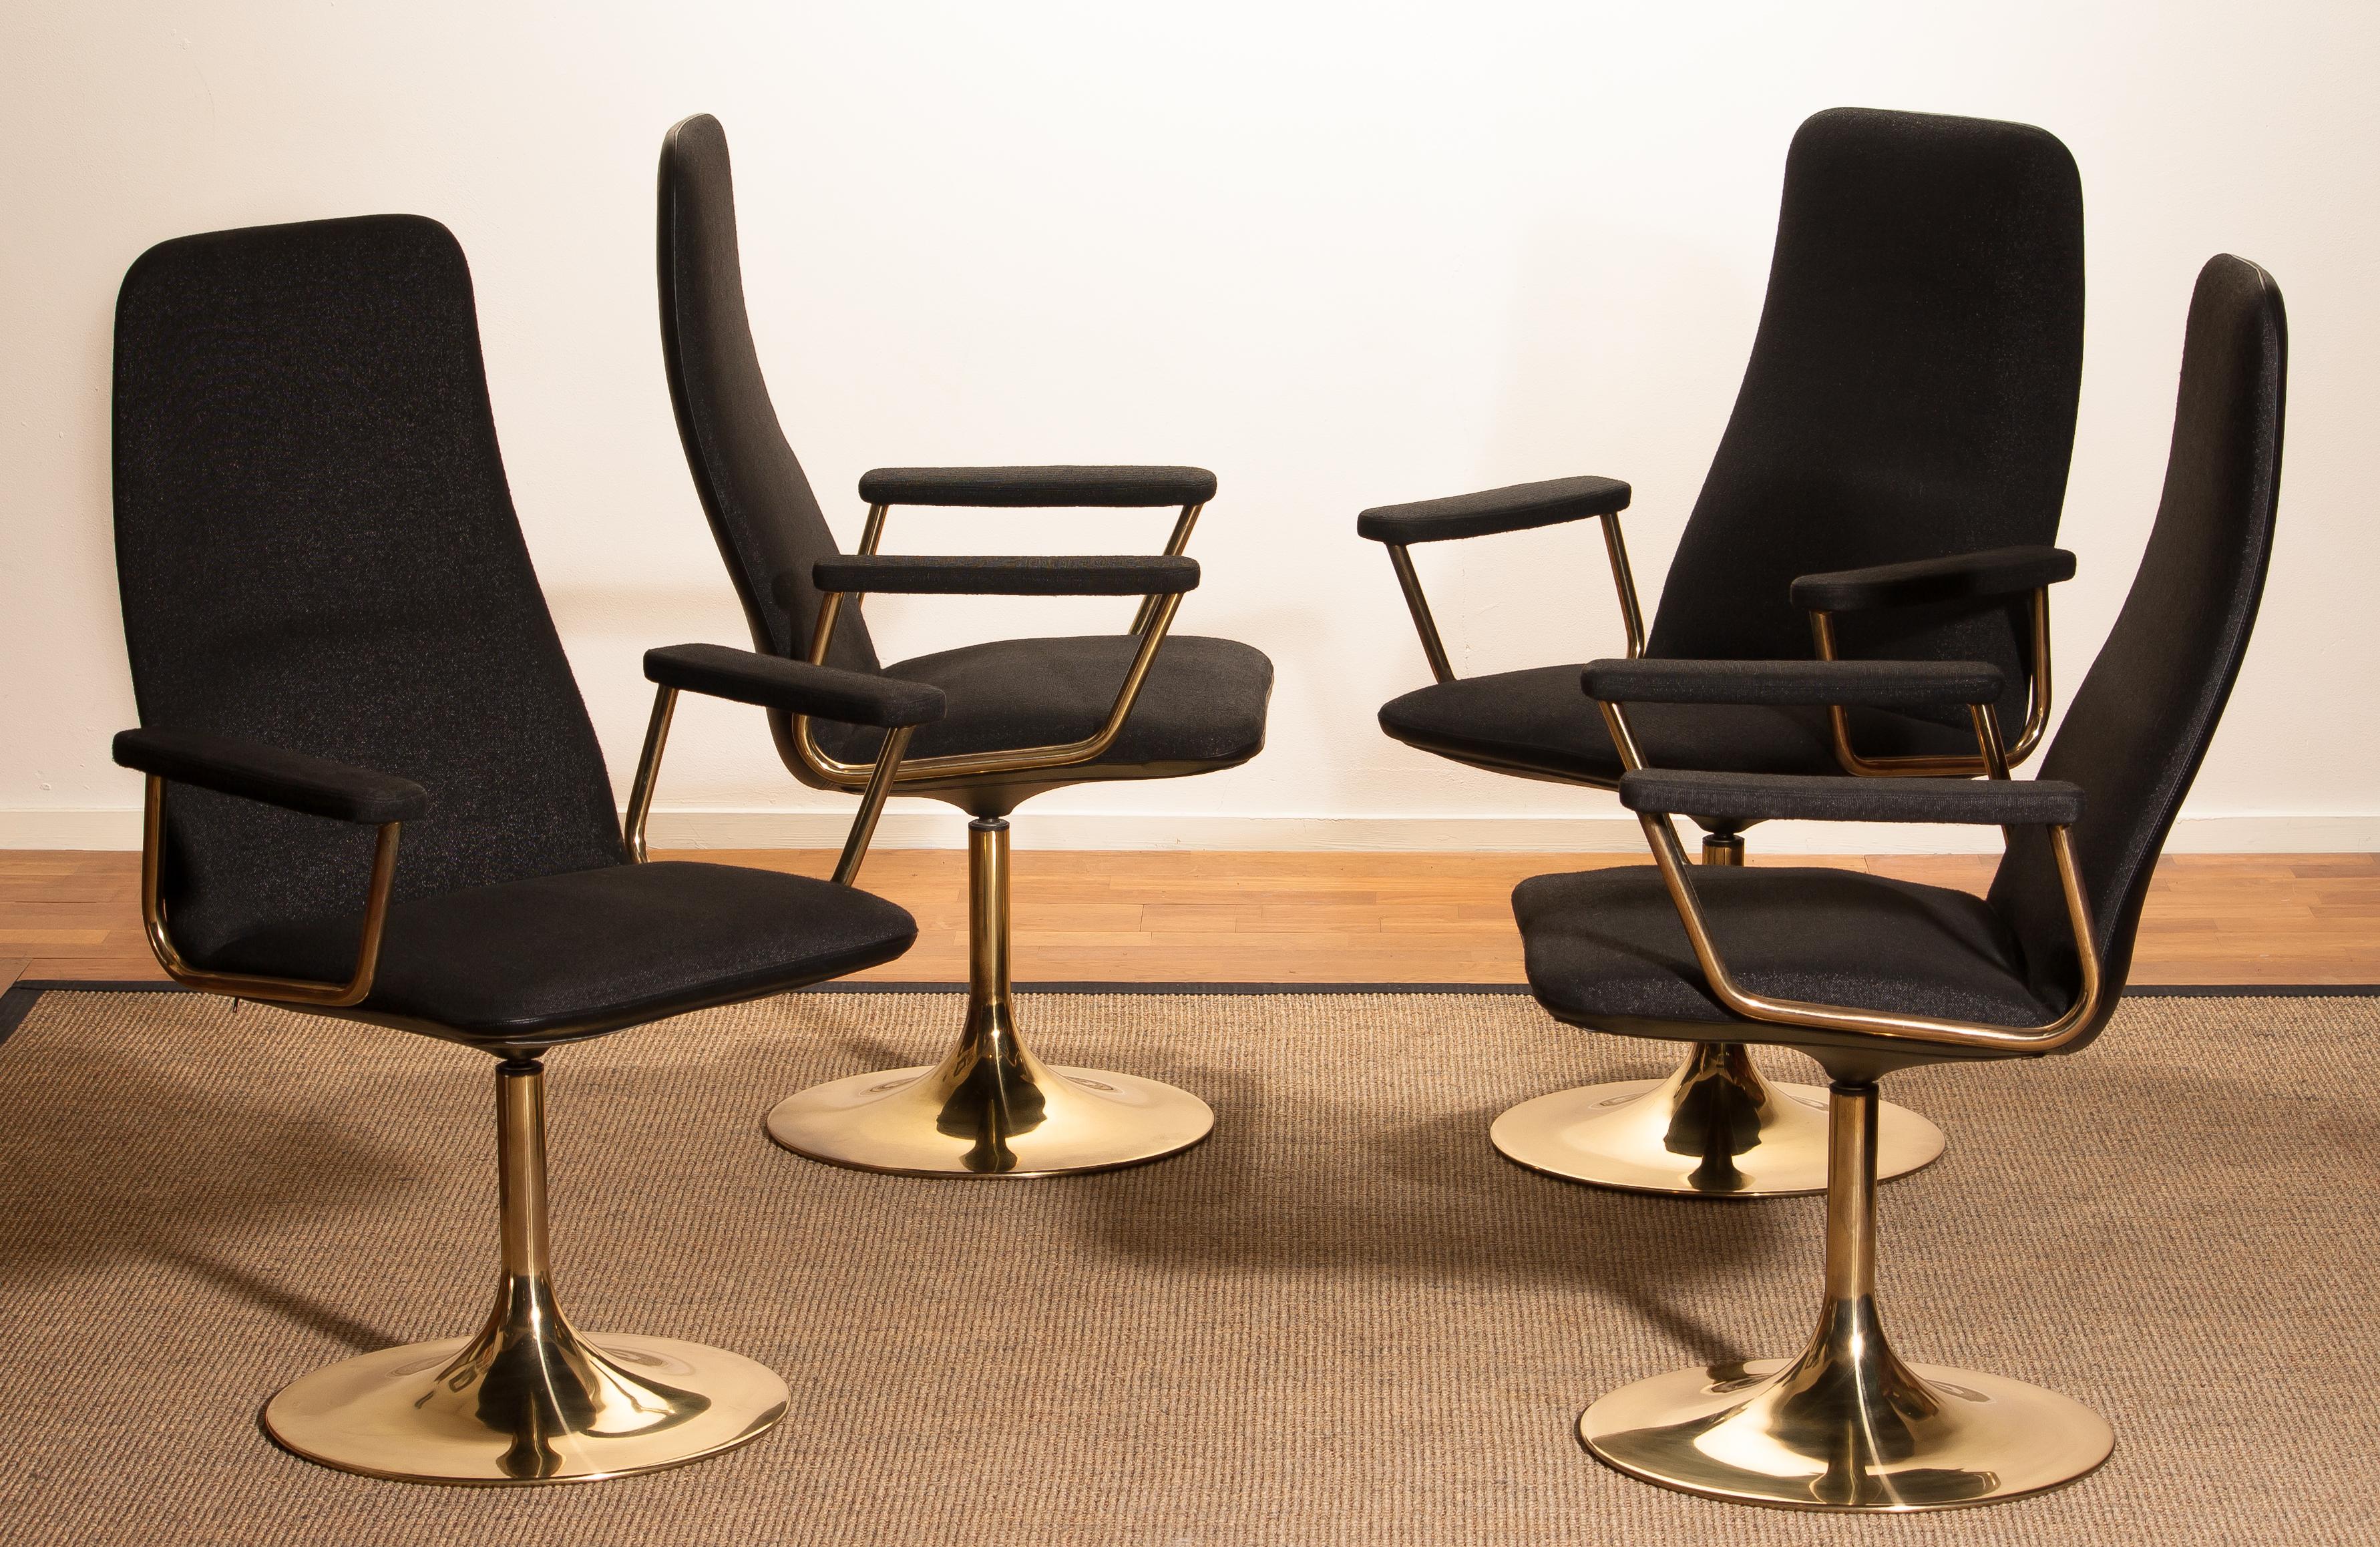 Four Golden, with Black Fabric, Armrest Swivel Chairs by Johanson Design, 1970 In Good Condition In Silvolde, Gelderland